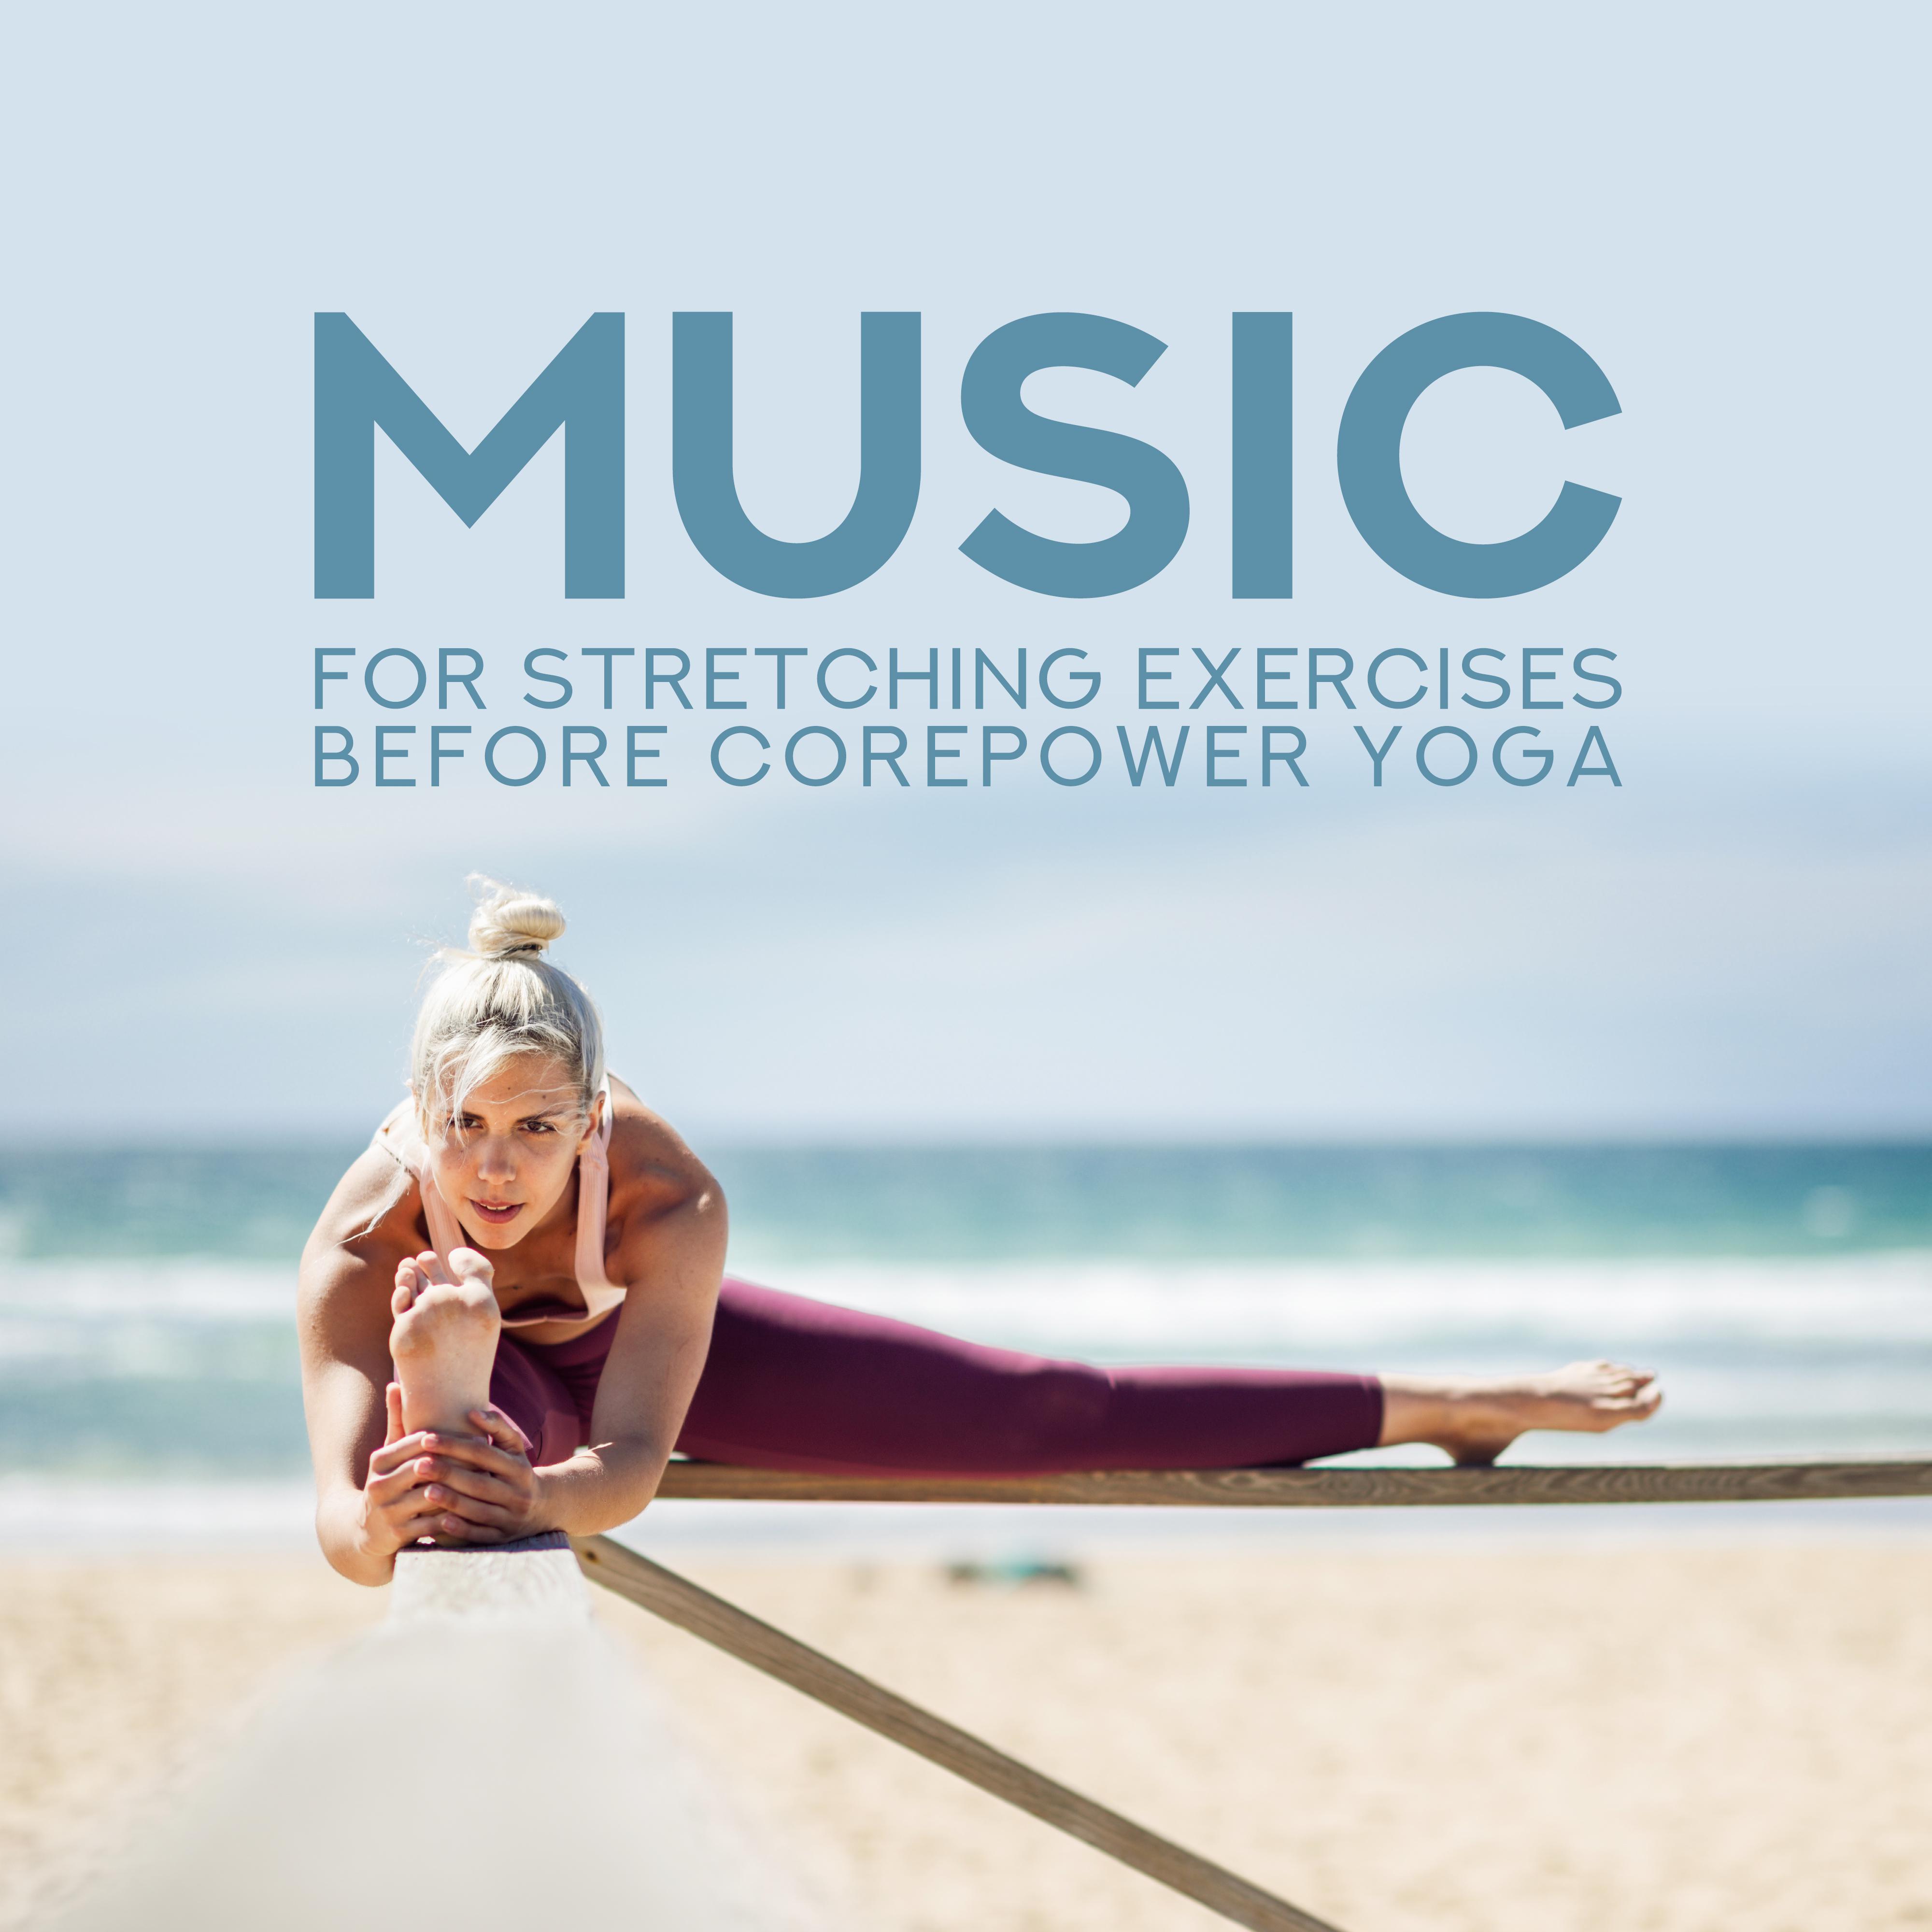 Music for Stretching Exercises before Corepower Yoga